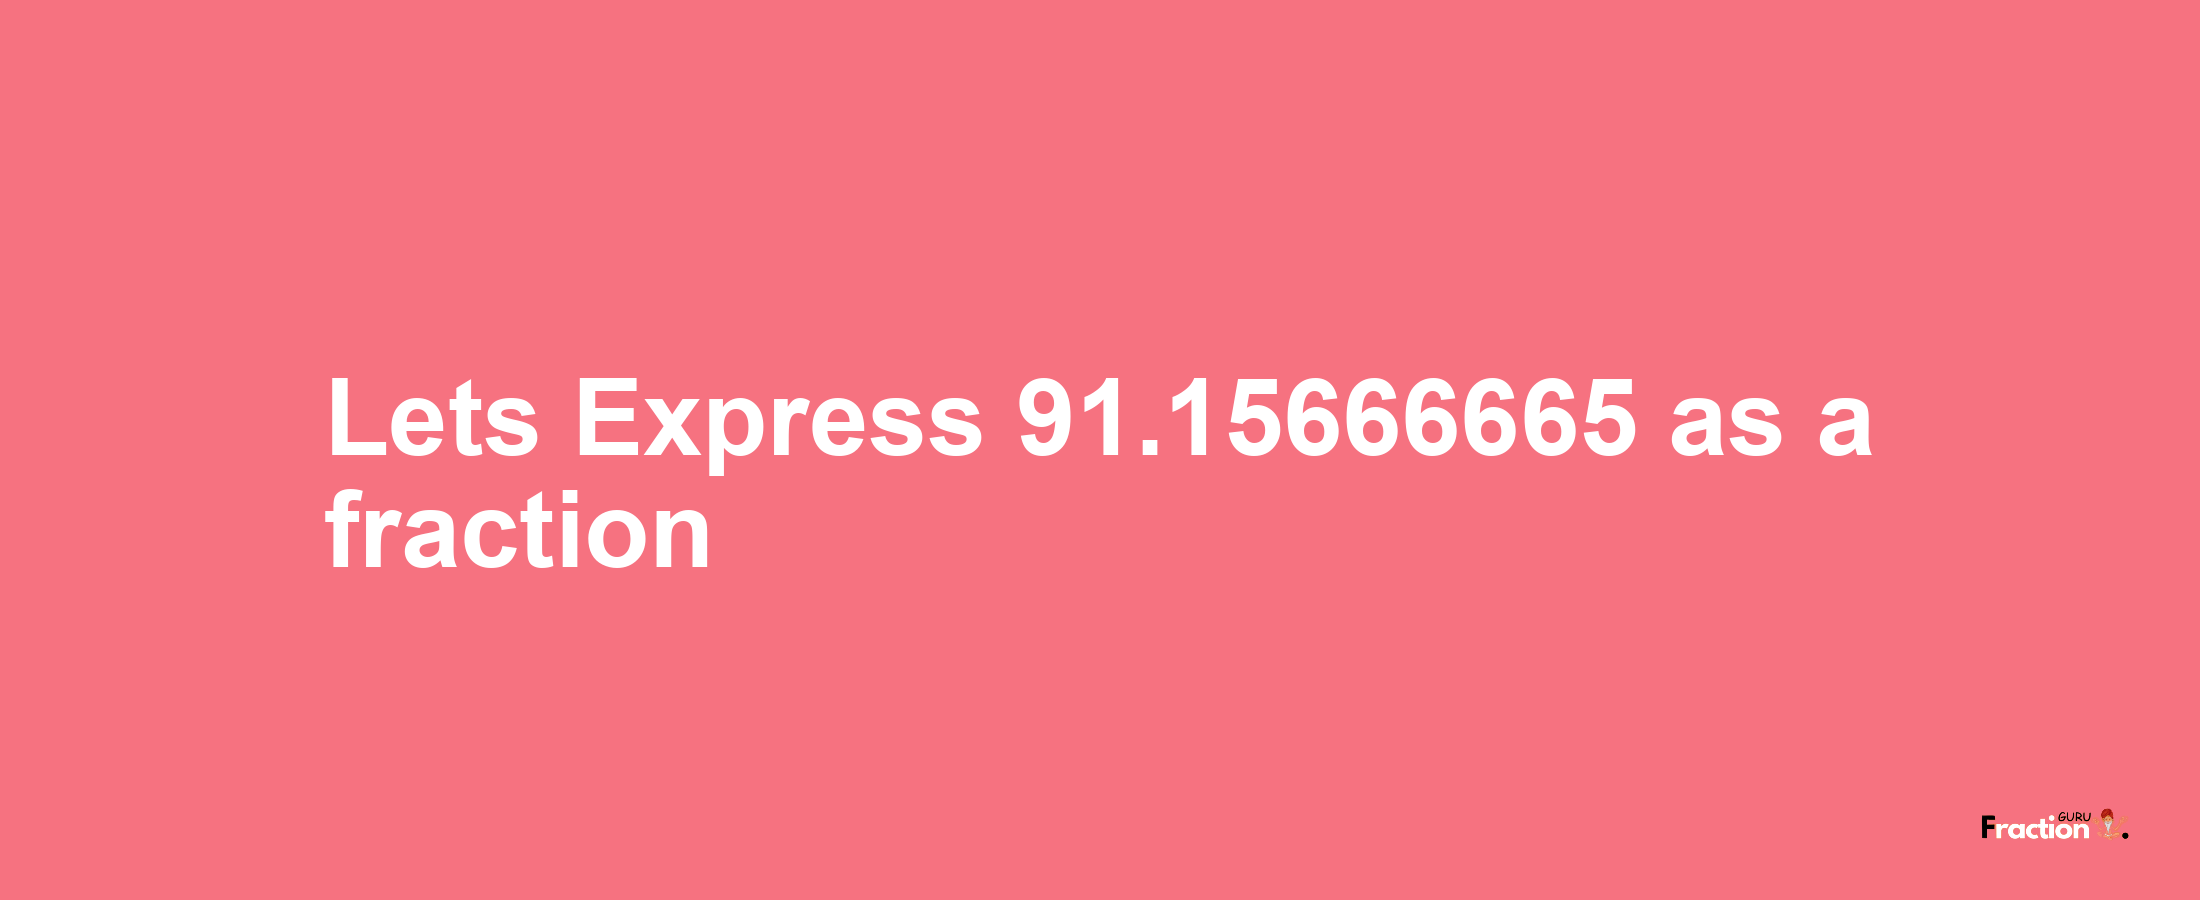 Lets Express 91.15666665 as afraction